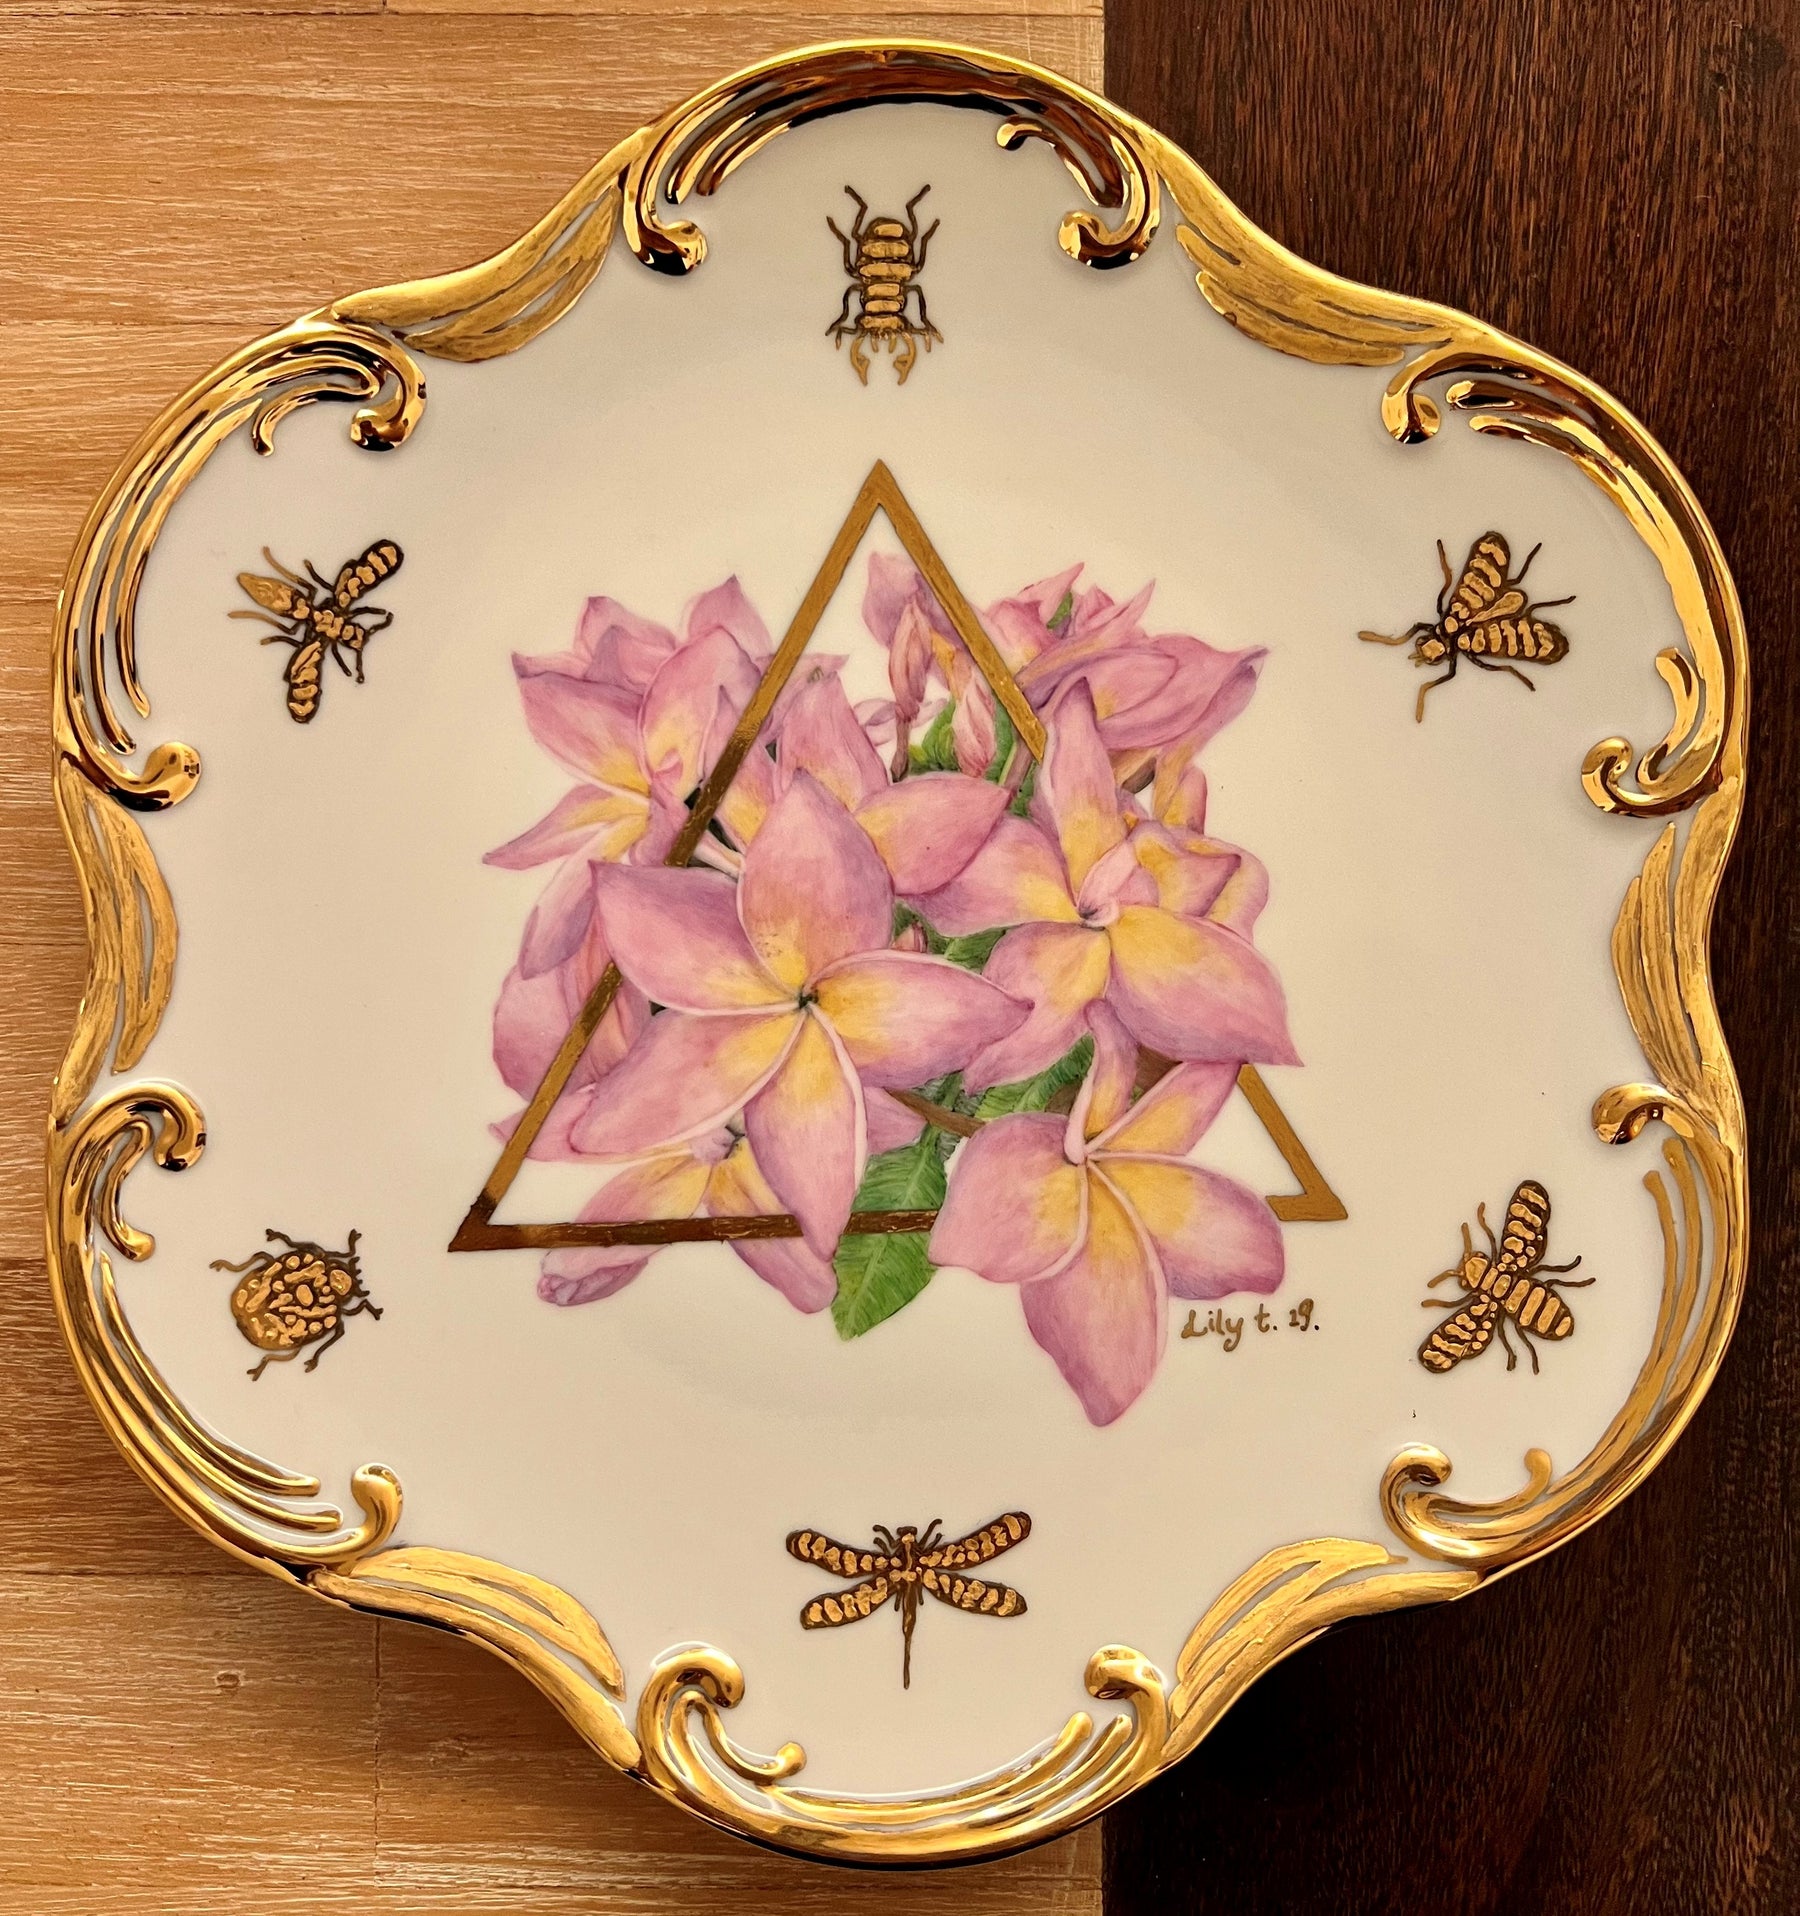 scrolled plate with pink flowers and gold